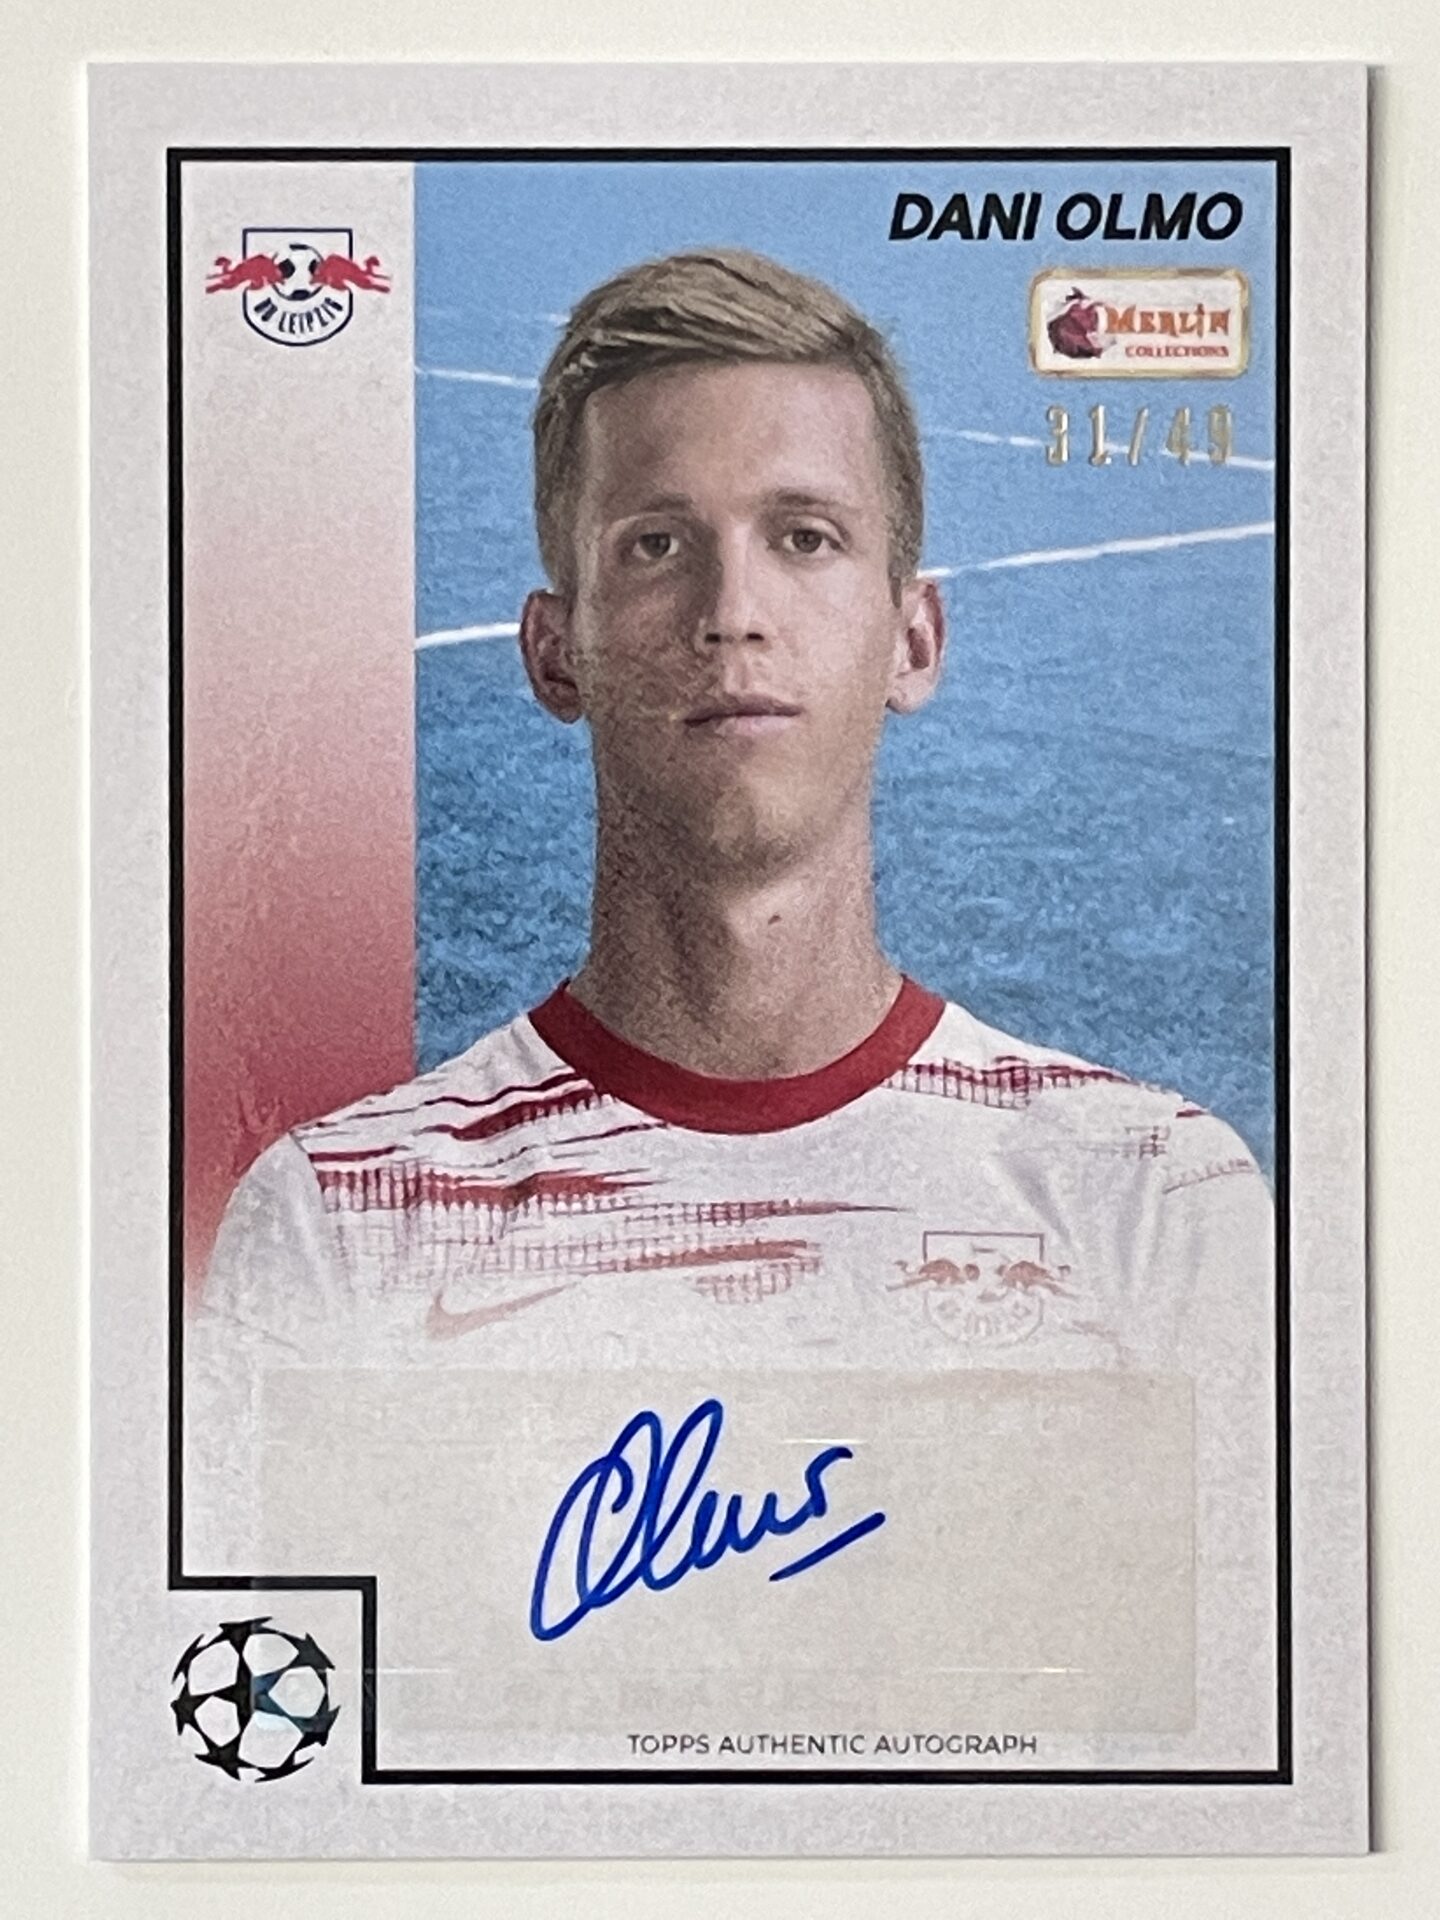 68 Dani Olmo RB Leipzig Base Autograph Parallel 31/49 Topps Merlin Heritage  97 UEFA Champions League Hobby Card